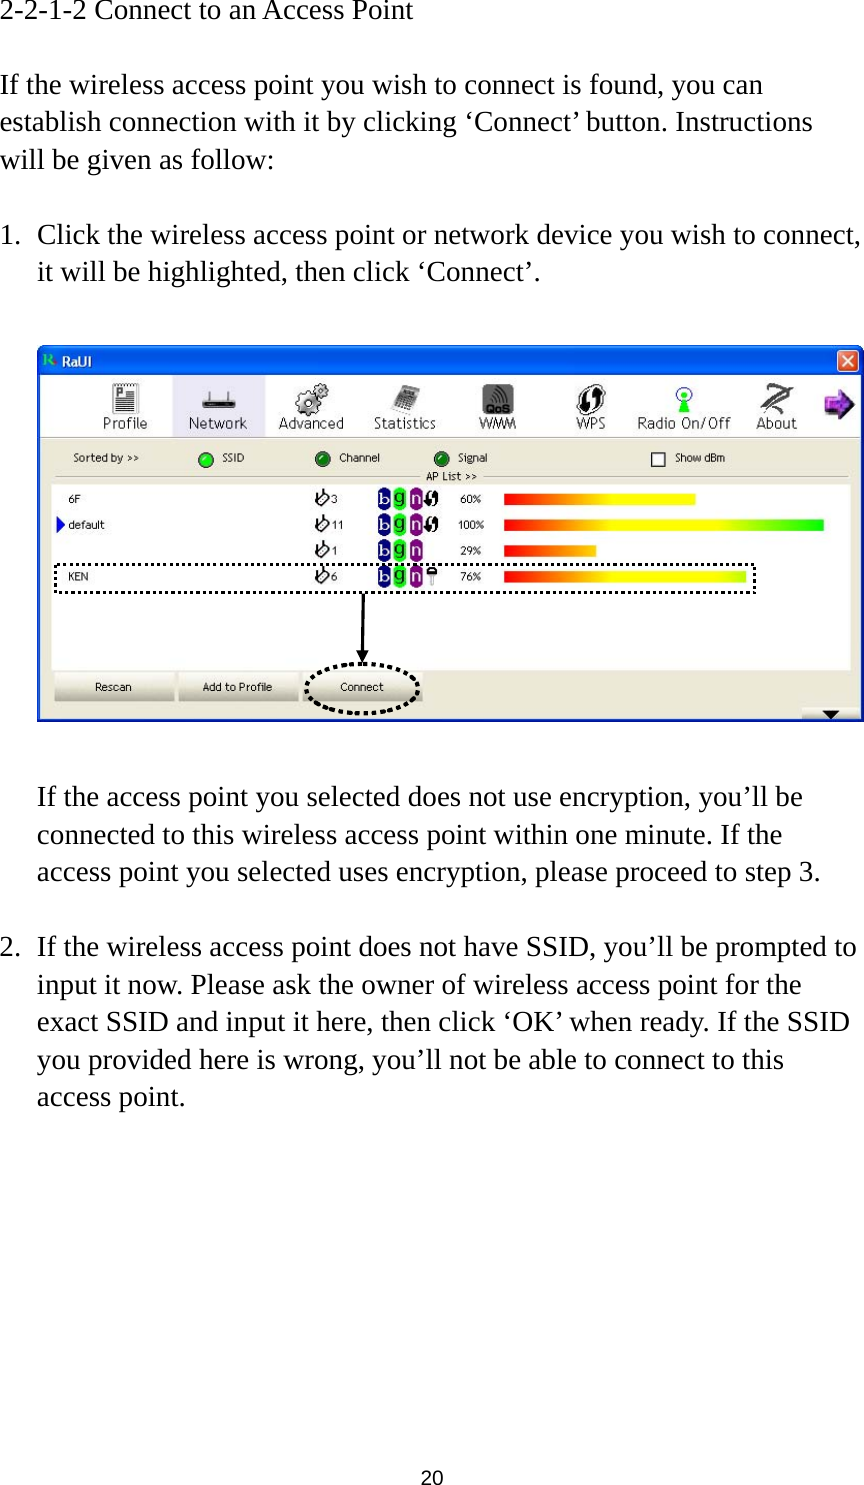  20 2-2-1-2 Connect to an Access Point  If the wireless access point you wish to connect is found, you can establish connection with it by clicking ‘Connect’ button. Instructions will be given as follow:  1. Click the wireless access point or network device you wish to connect, it will be highlighted, then click ‘Connect’.    If the access point you selected does not use encryption, you’ll be connected to this wireless access point within one minute. If the access point you selected uses encryption, please proceed to step 3.  2. If the wireless access point does not have SSID, you’ll be prompted to input it now. Please ask the owner of wireless access point for the exact SSID and input it here, then click ‘OK’ when ready. If the SSID you provided here is wrong, you’ll not be able to connect to this access point. 